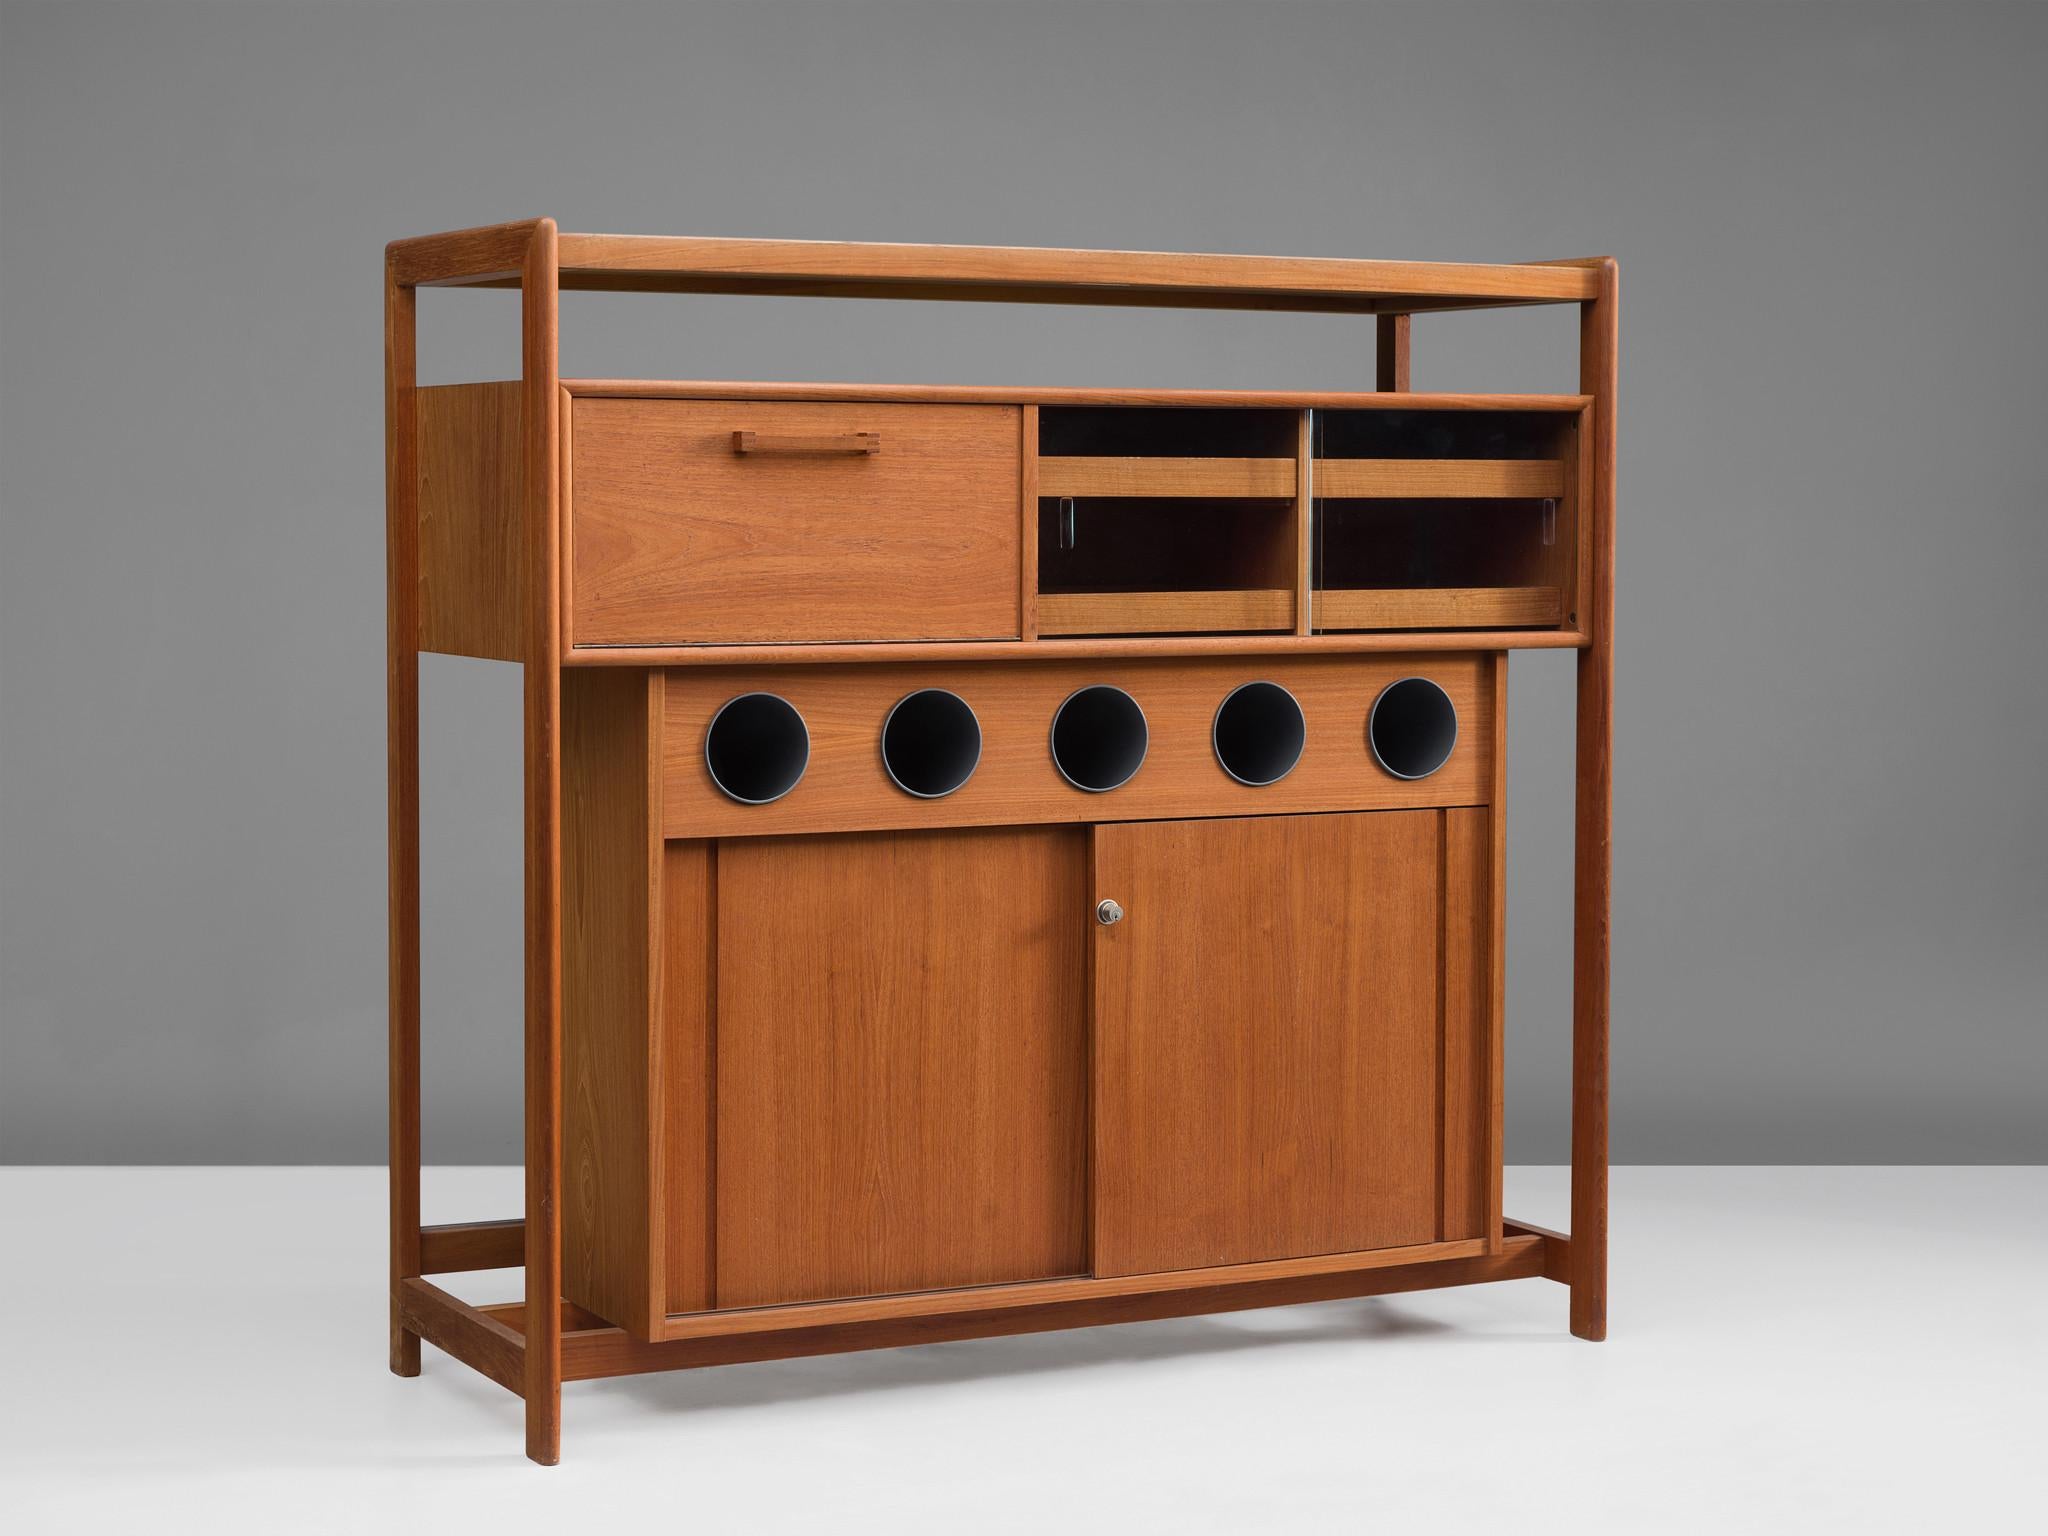 Erich Buch for Dyrlund, dry bar, teak, wood, glass, Denmark, 1960s

Very functional Danish dry bar in teak. This dry bar is well-constructed and features clever storage facilities. The design is stable, geometric and functional. The several storage